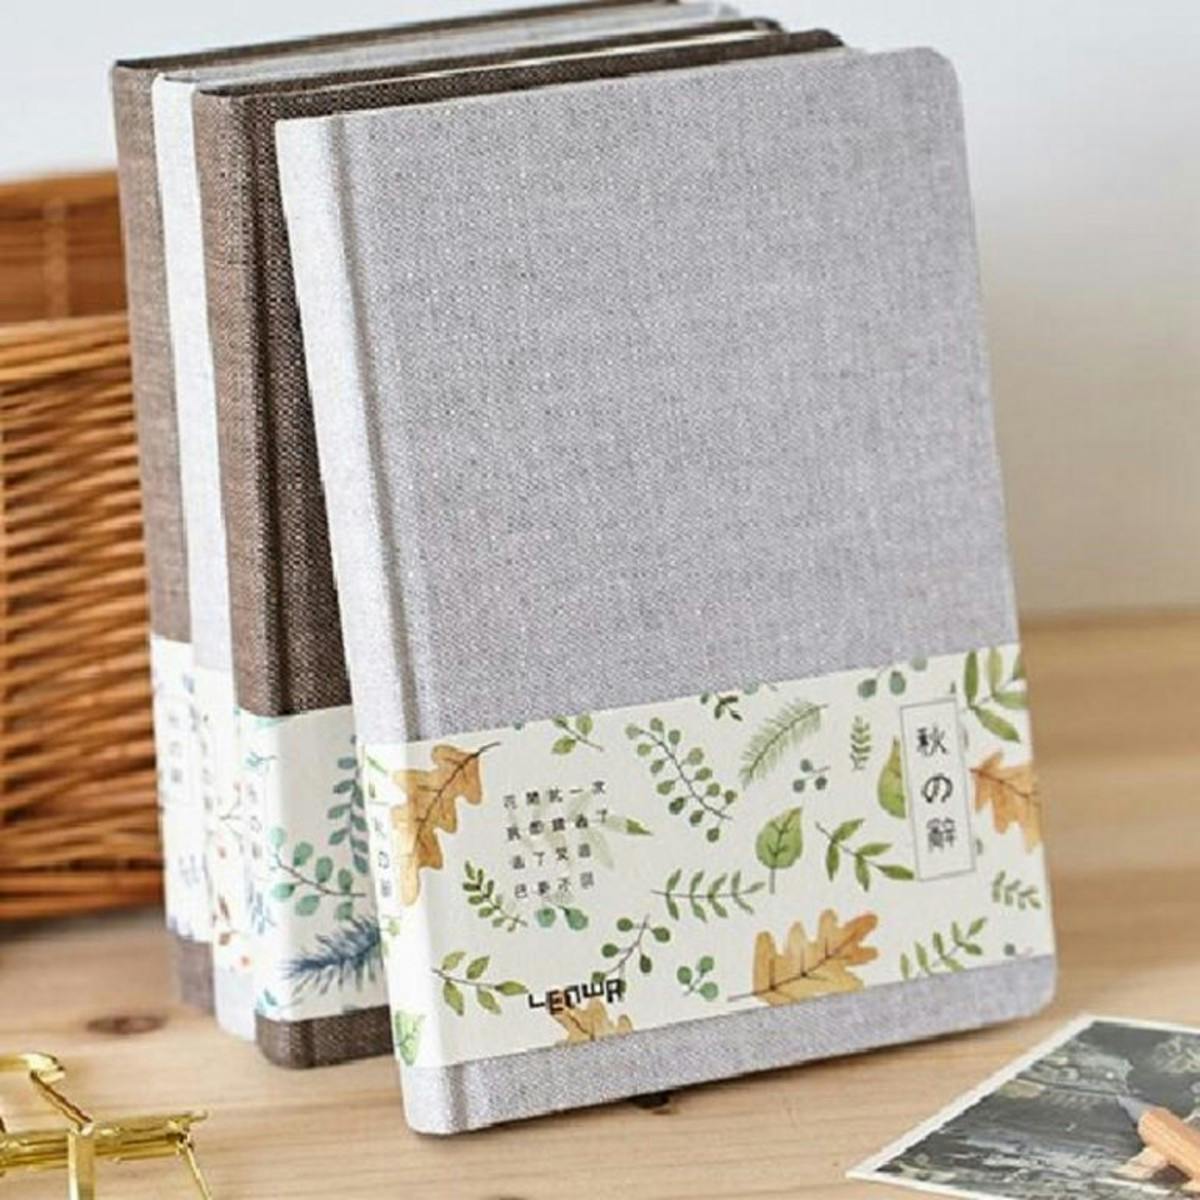  Fabric book covers